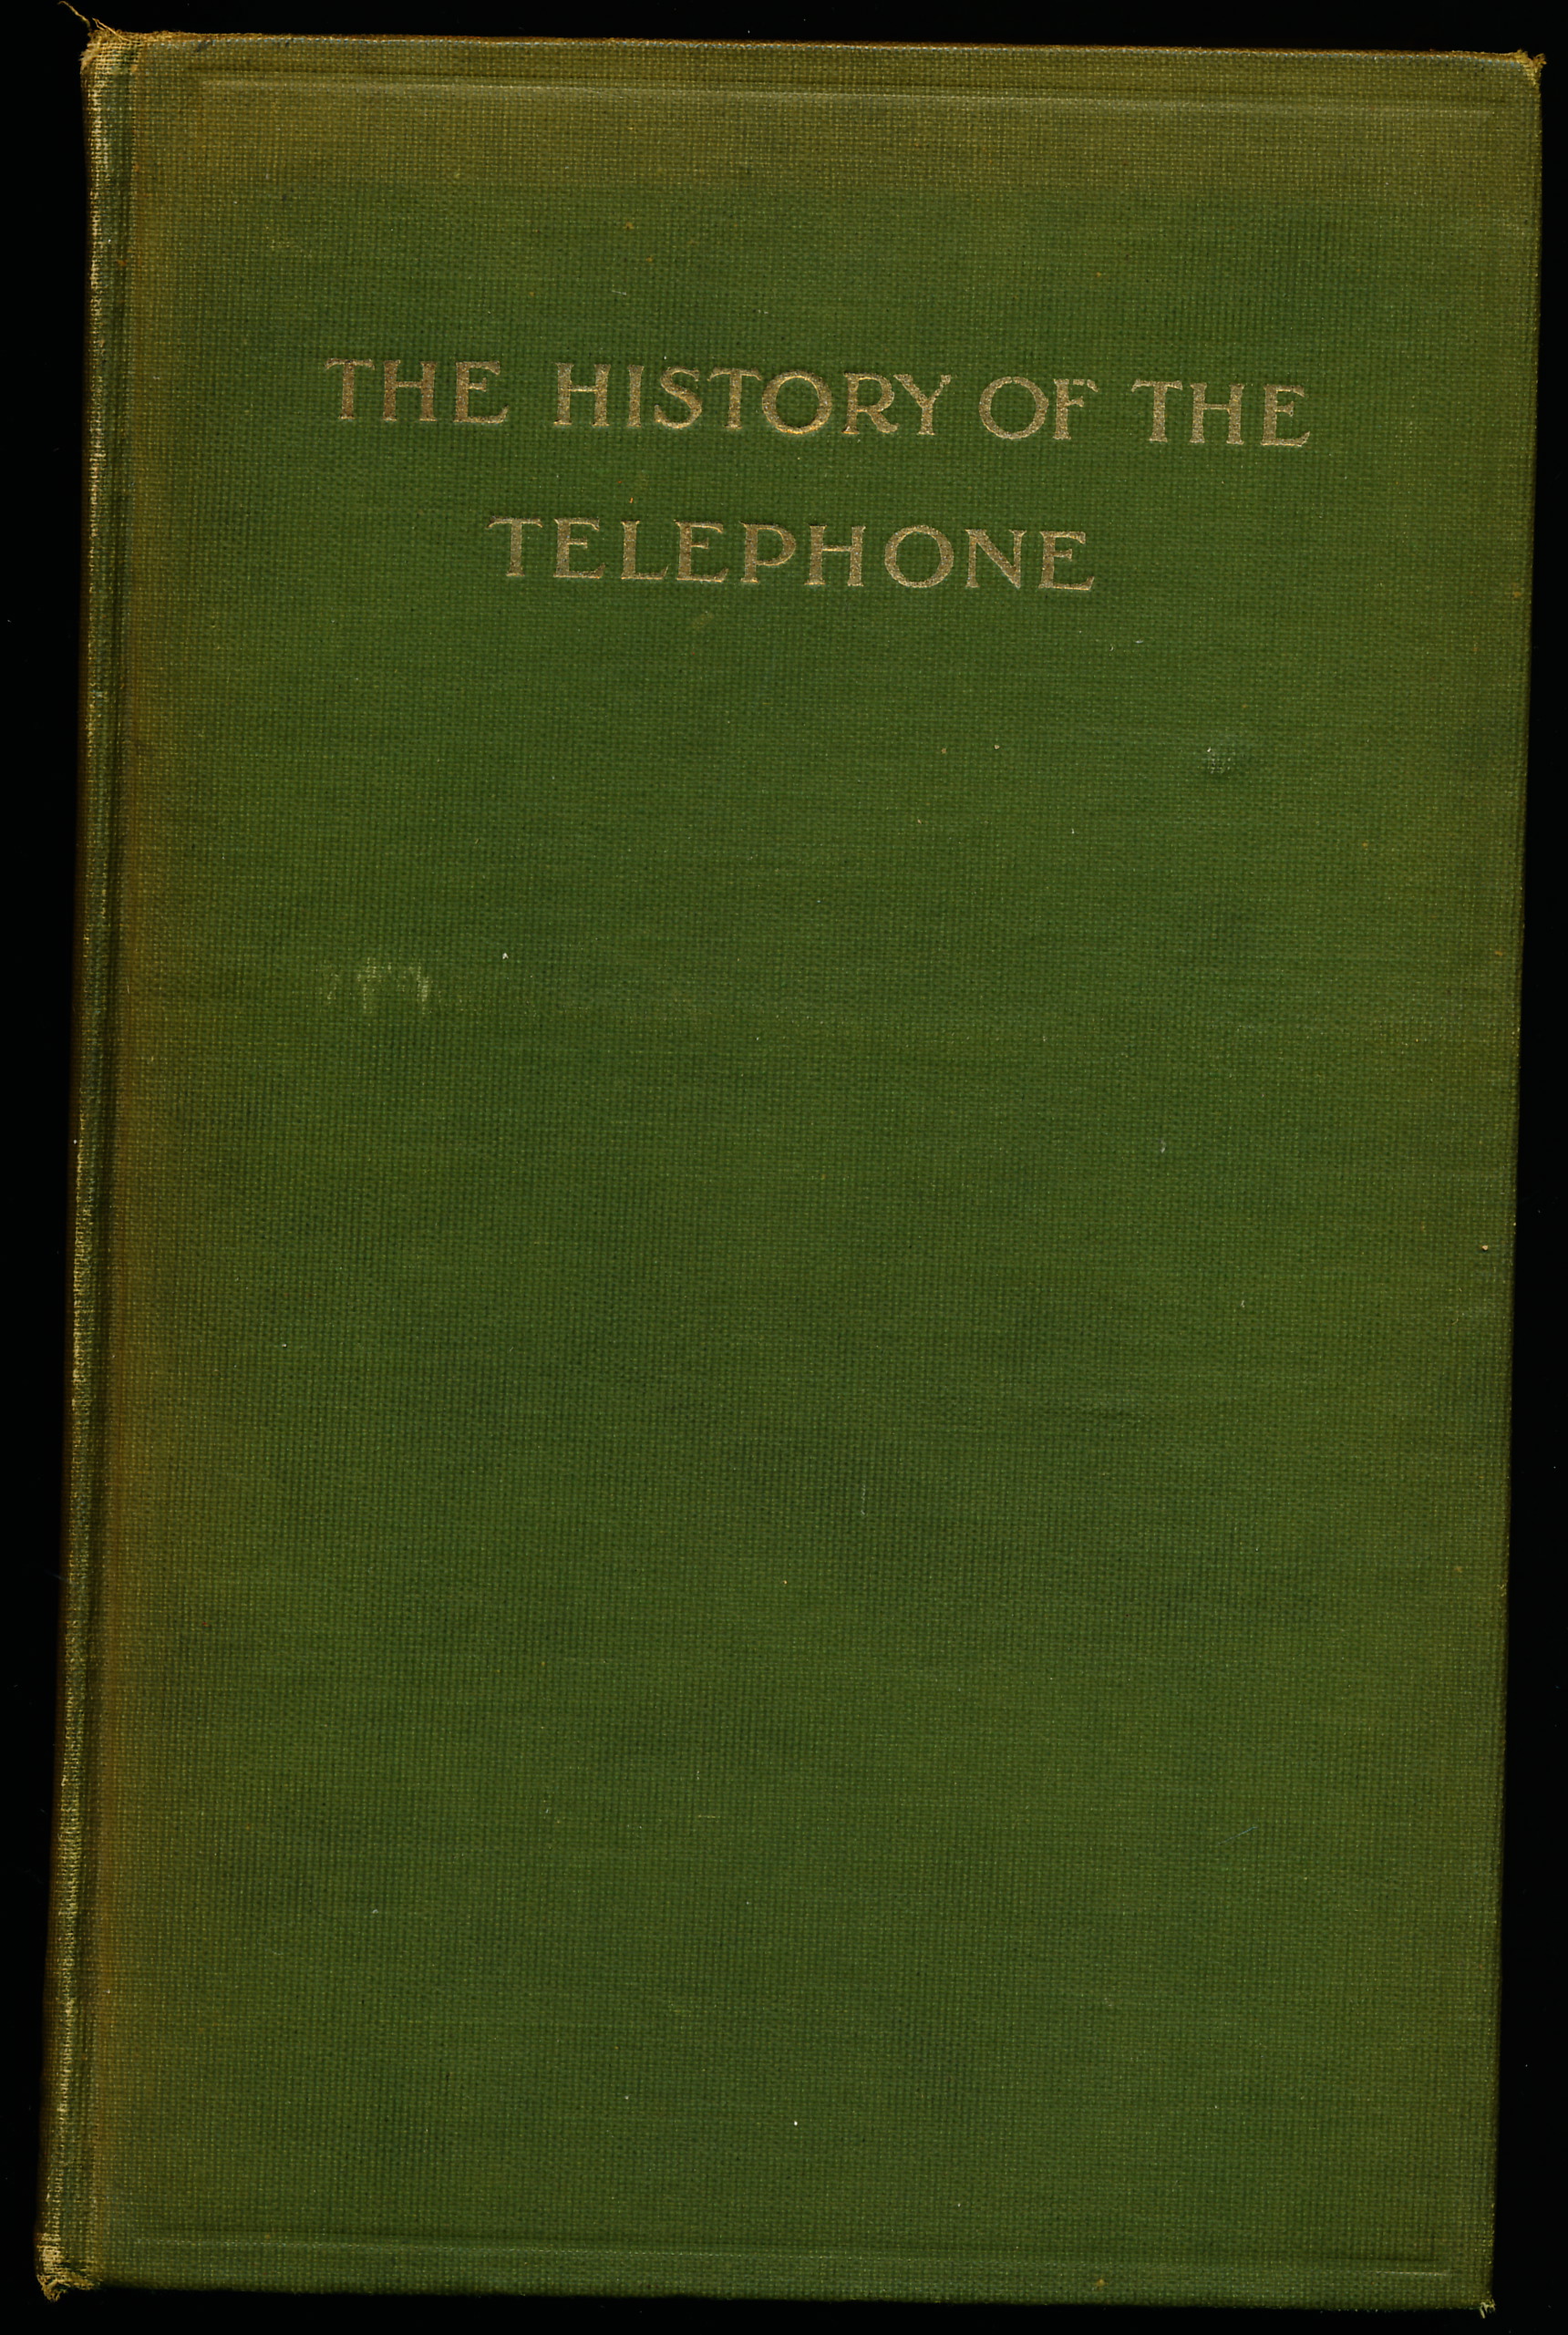 The History of the Telephone book image